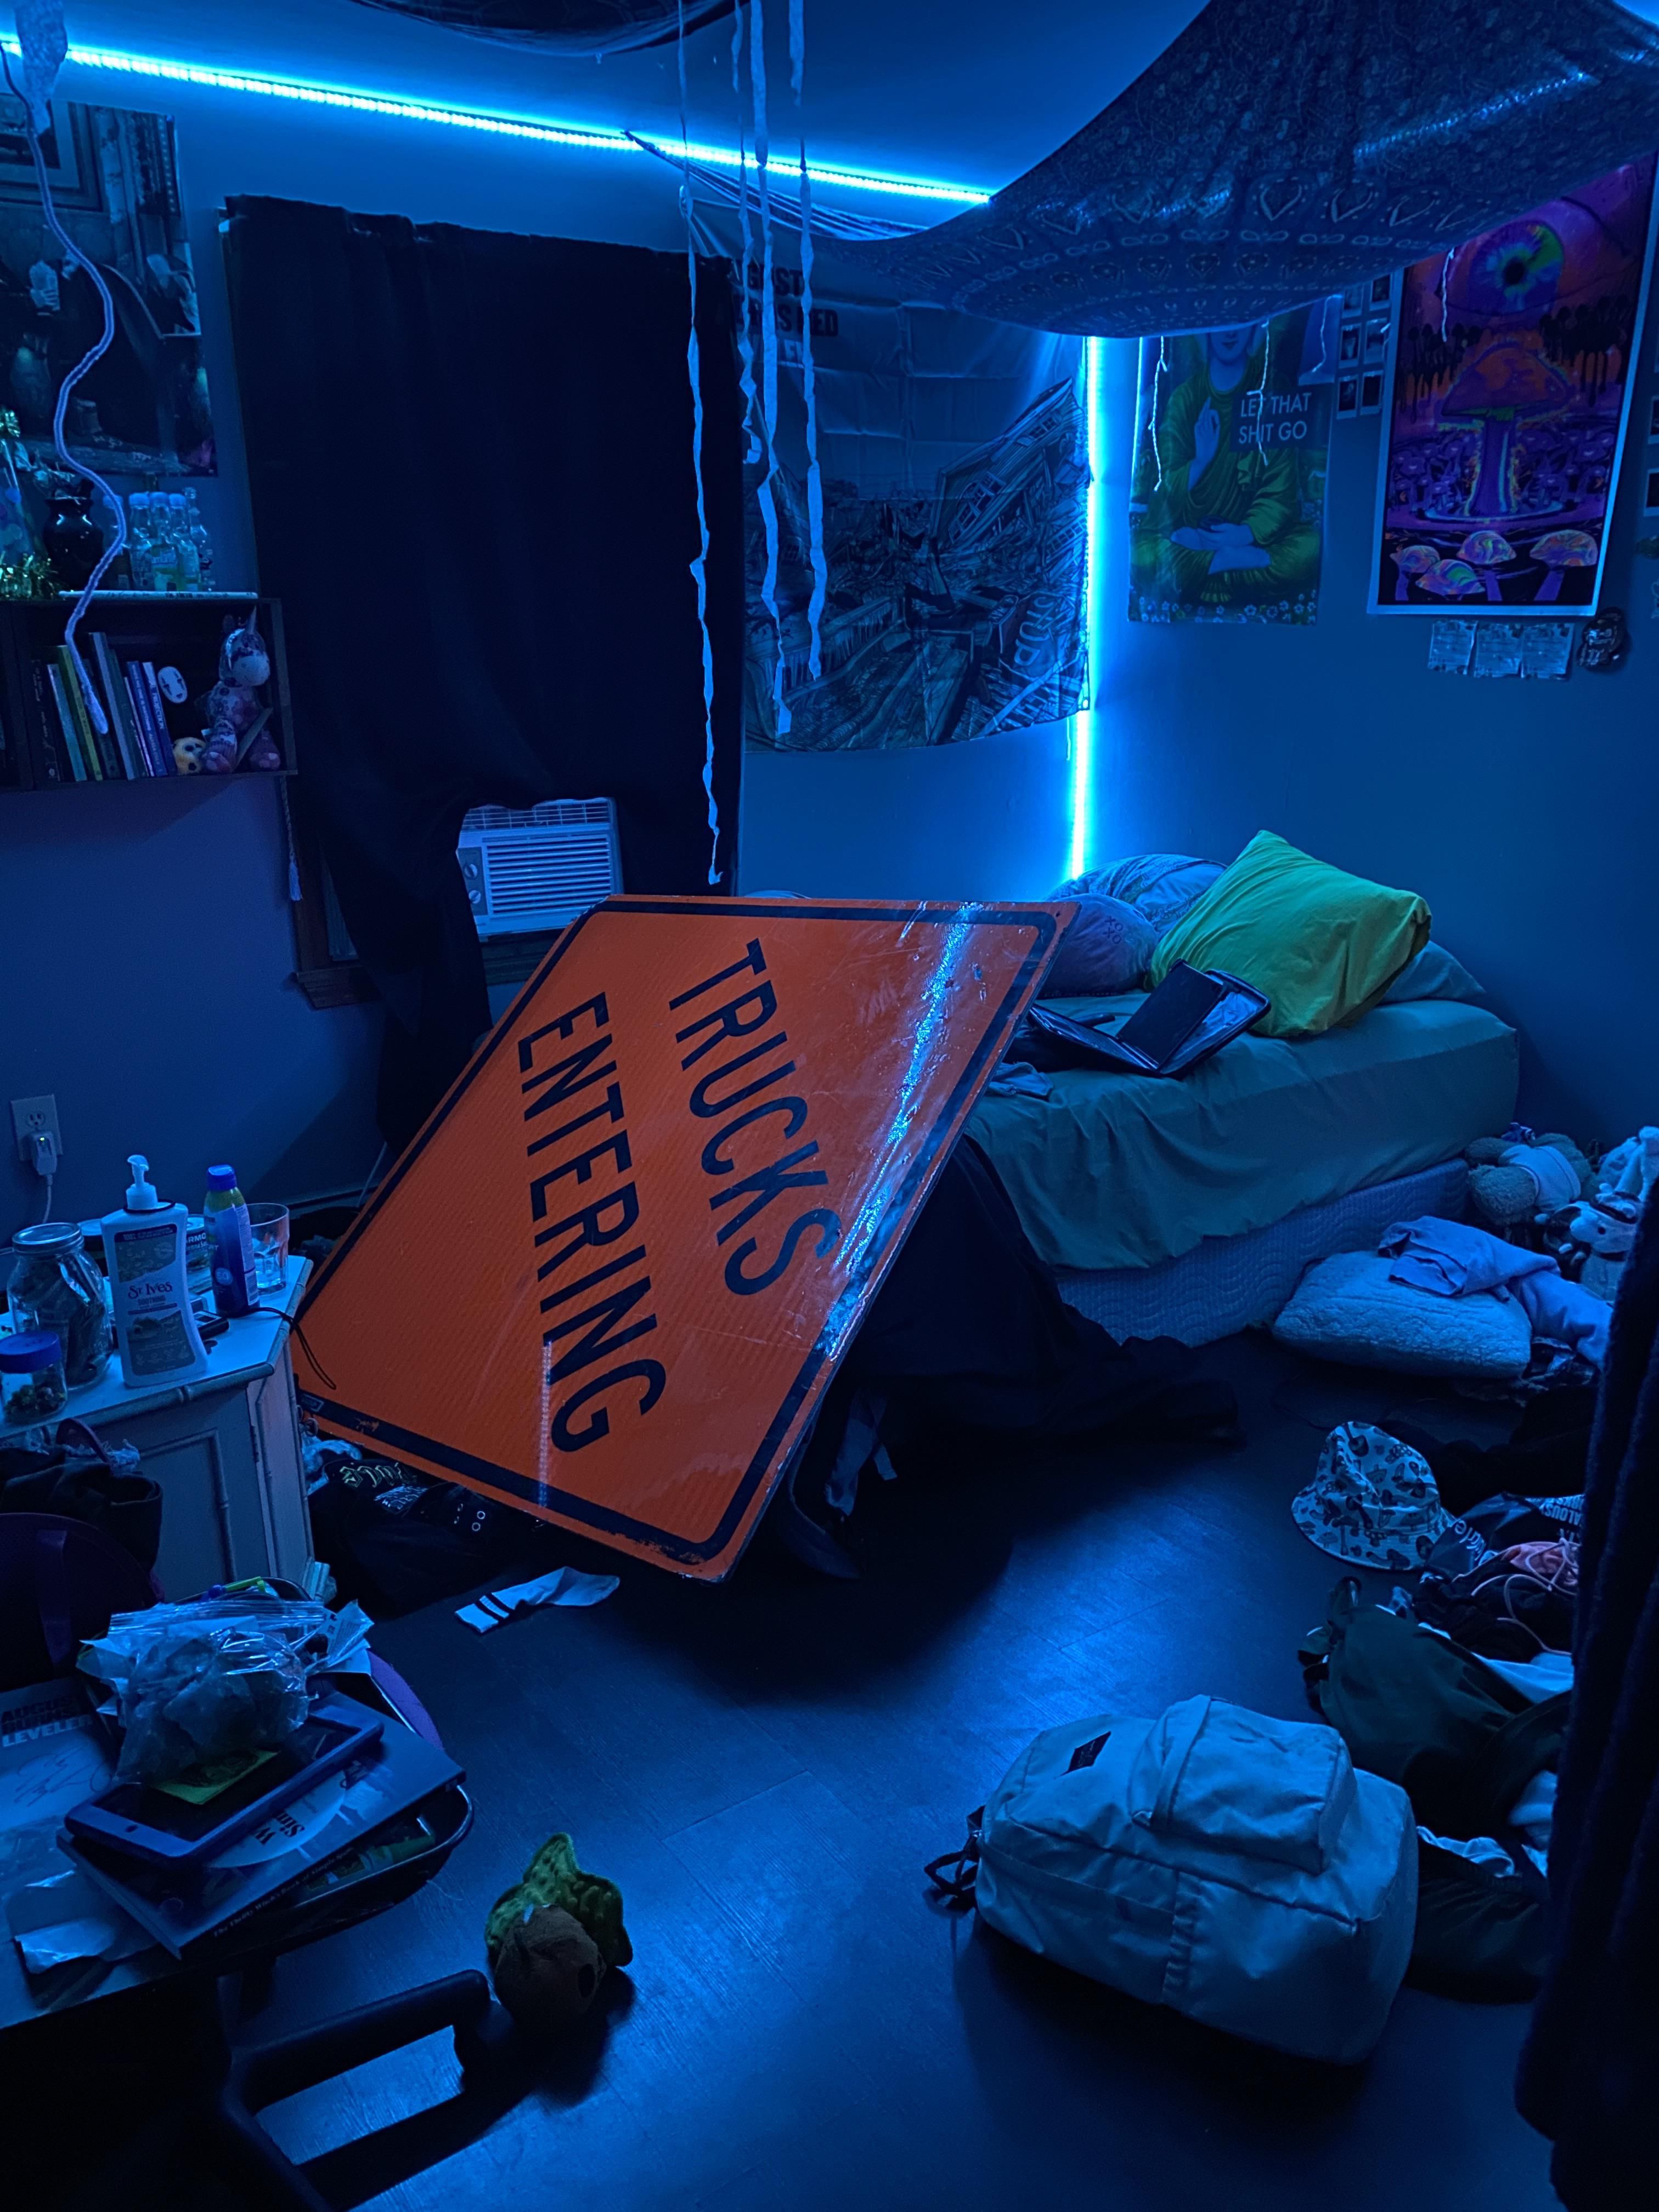 Sigh. My teen stole her first sign last night.